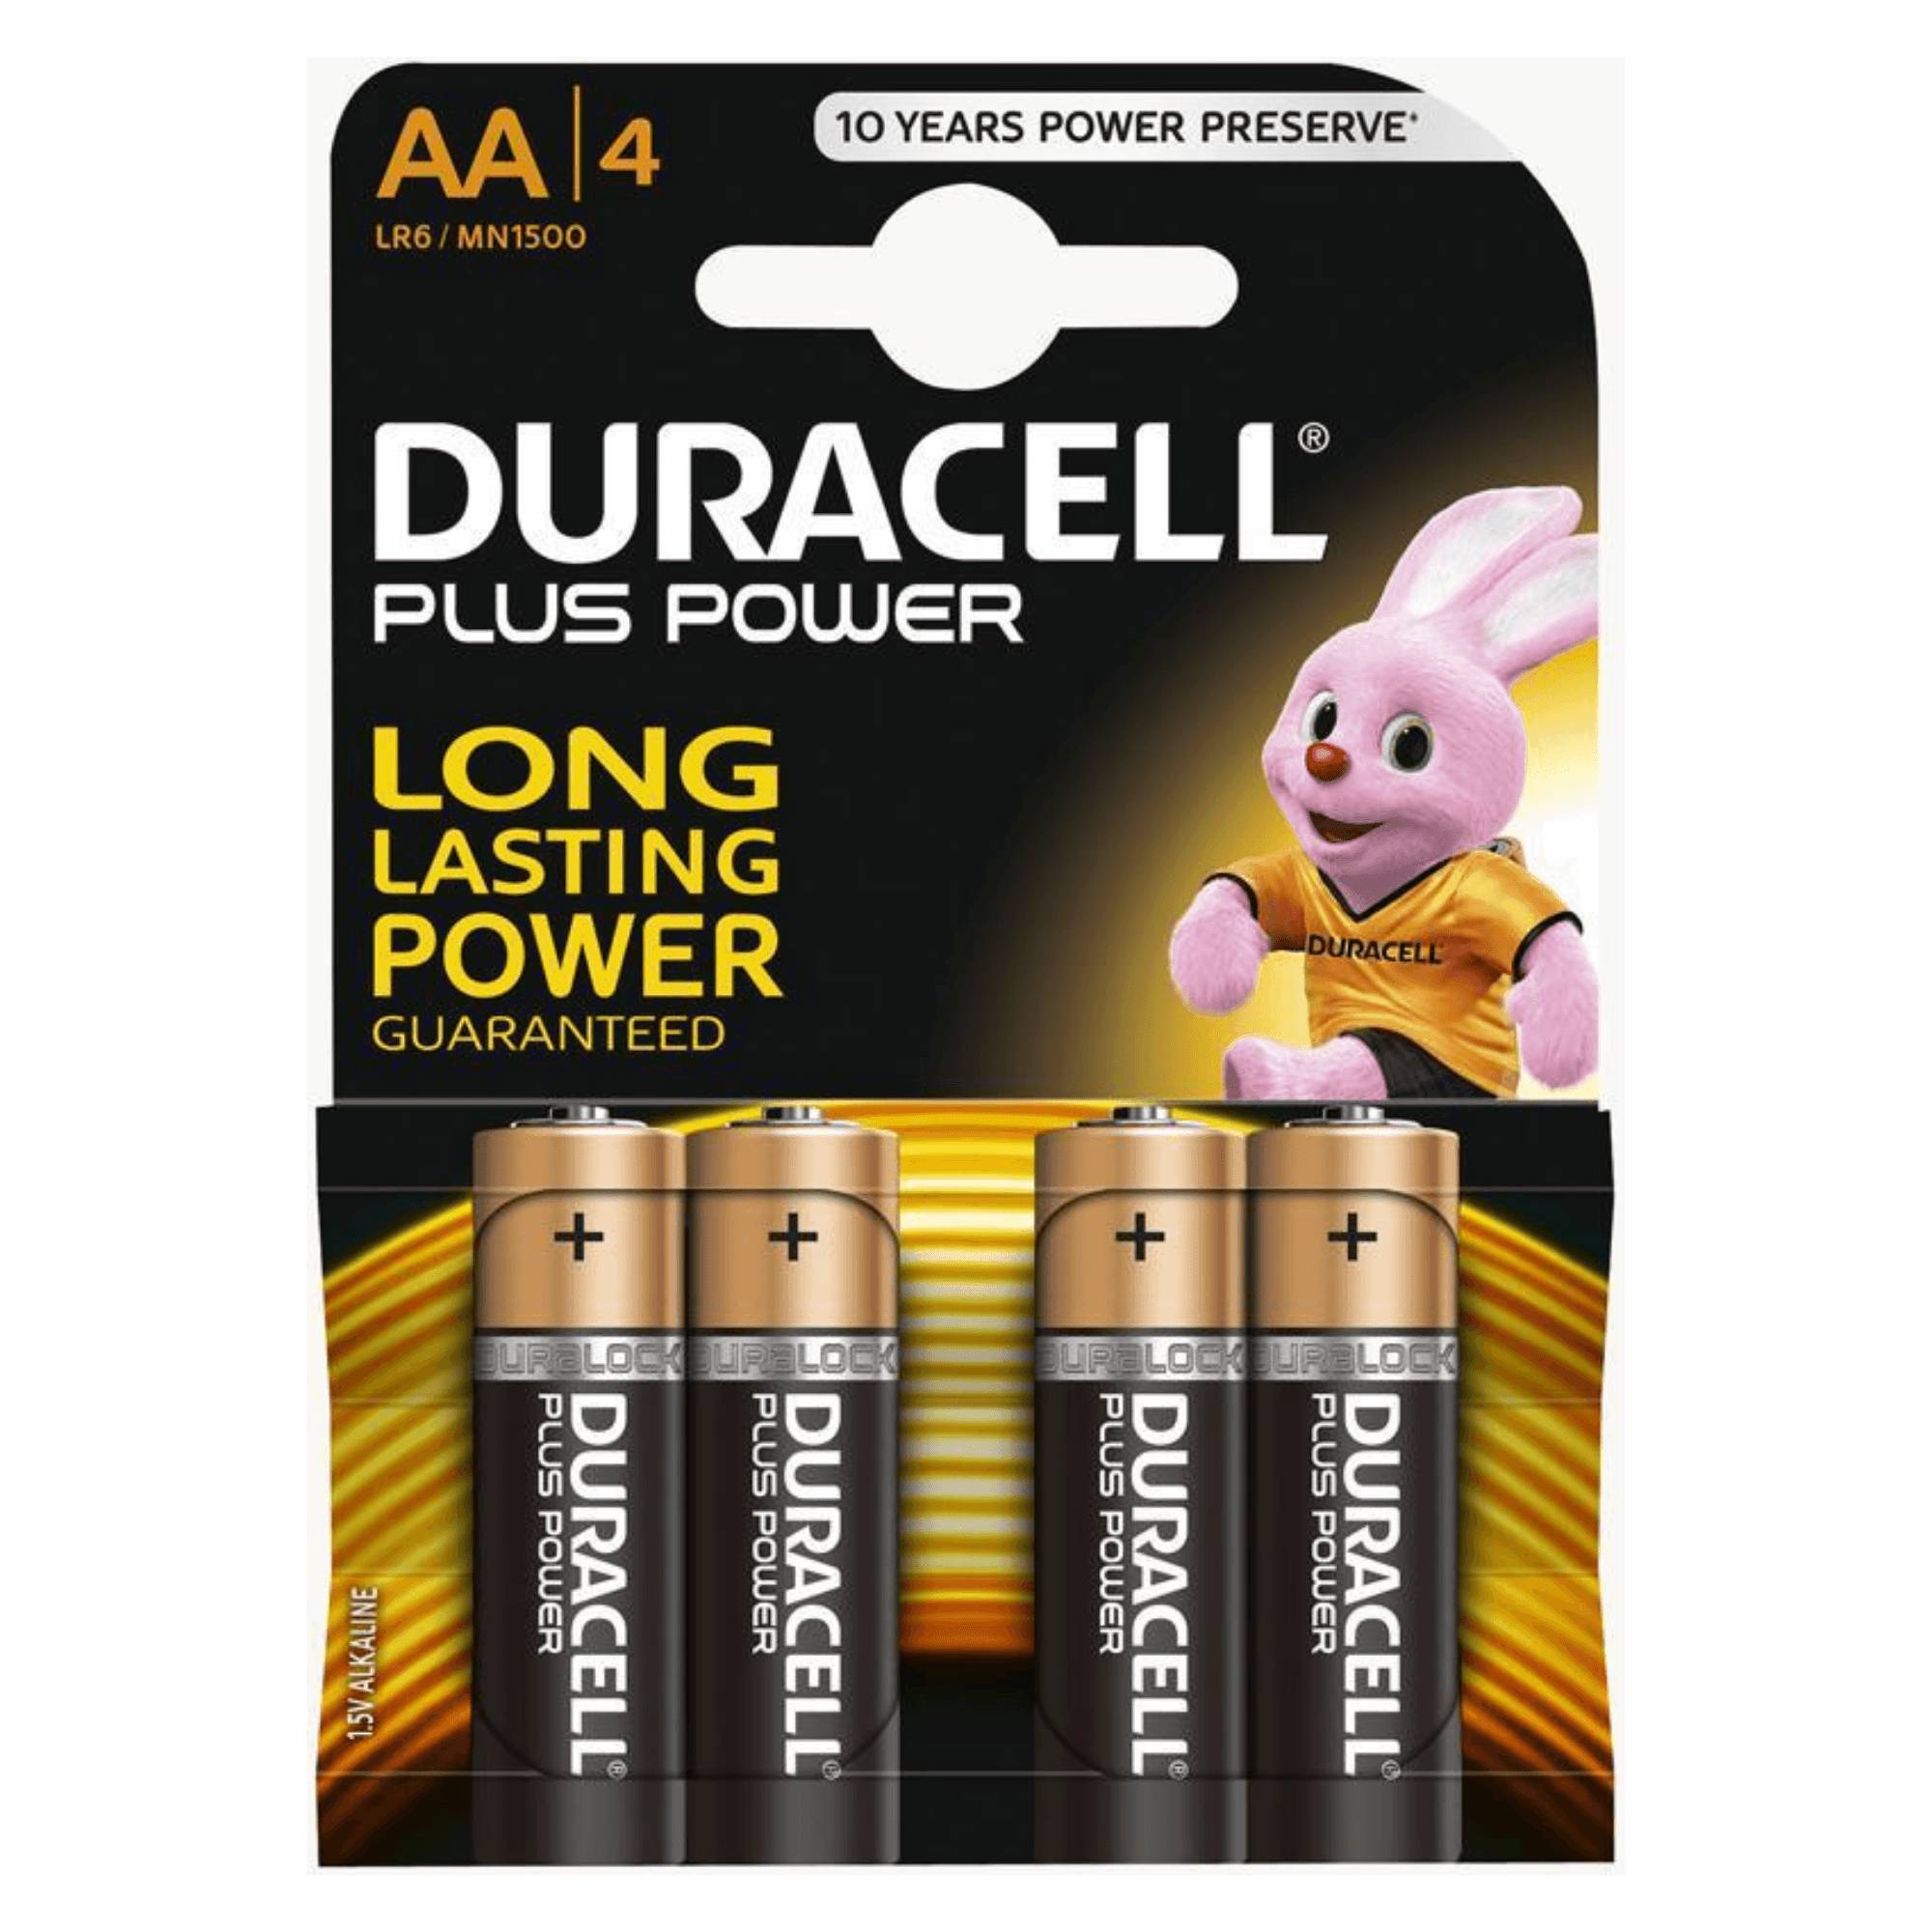 Duracell Plus Power AA Alkaline Batteries | 4 Pack | LR6/MN1500 - Choice Stores